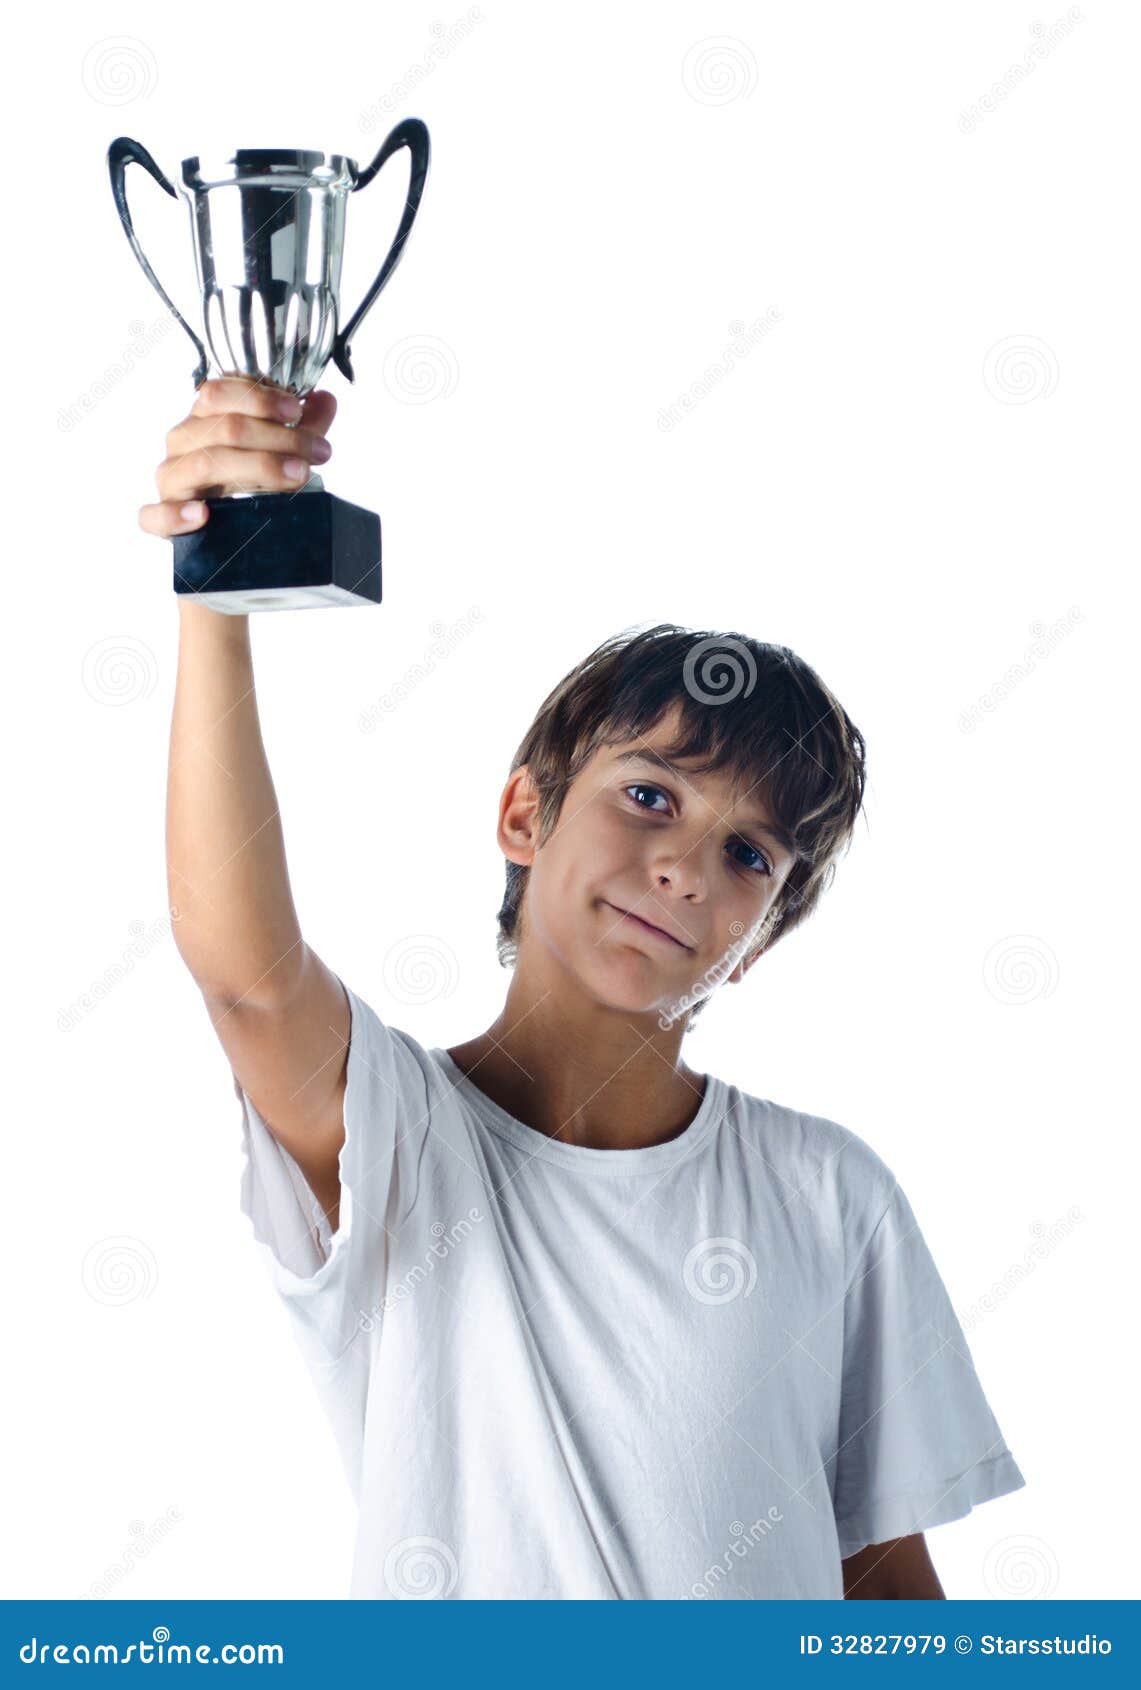 Champion Child Holding Winner Cup Stock Image - Image of person ...